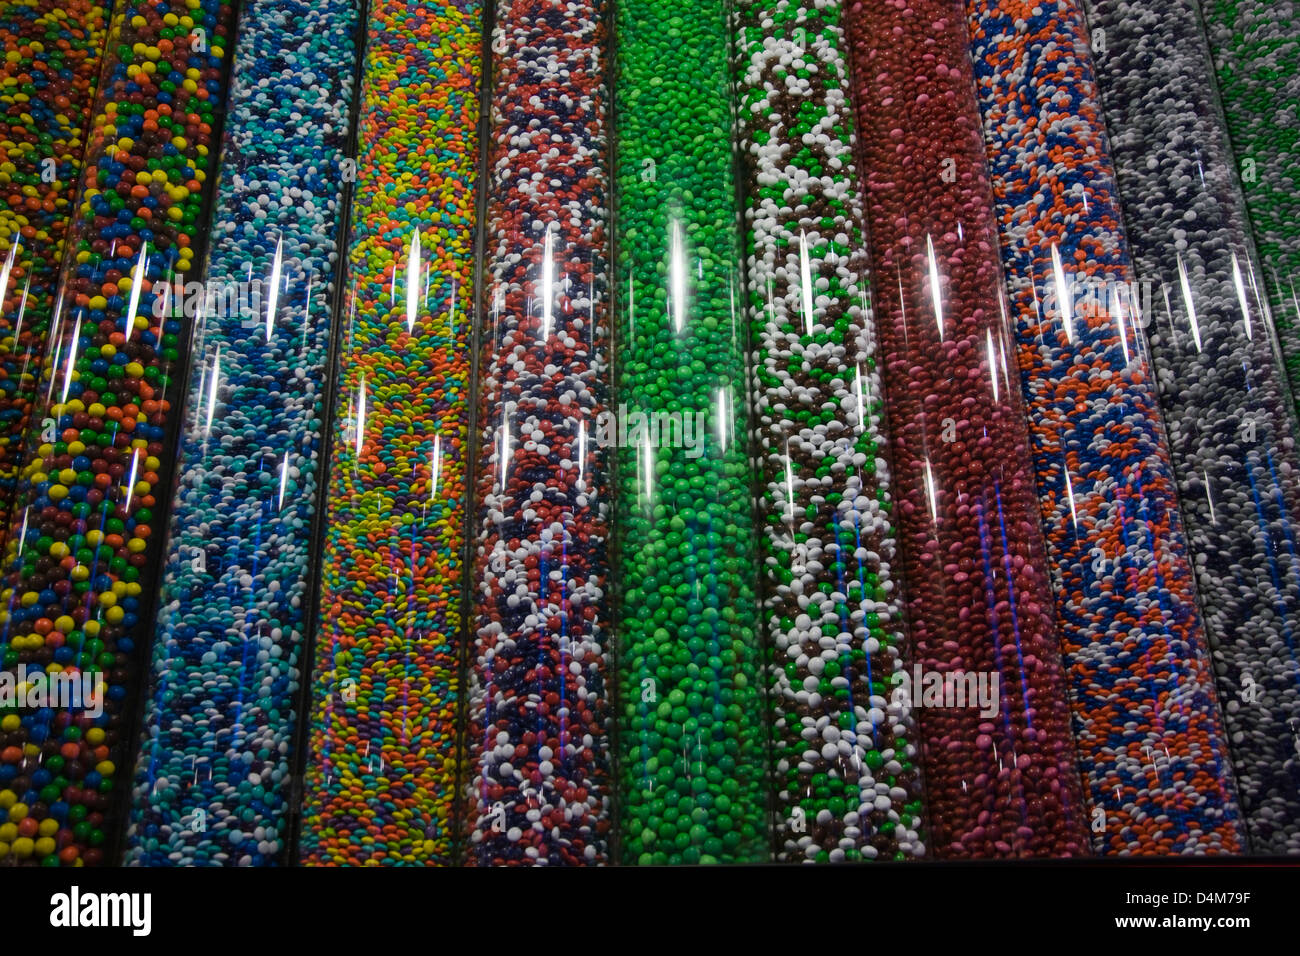 M&Ms sweets in plastic dispenser tubes in the M&M shop in New York Stock Photo